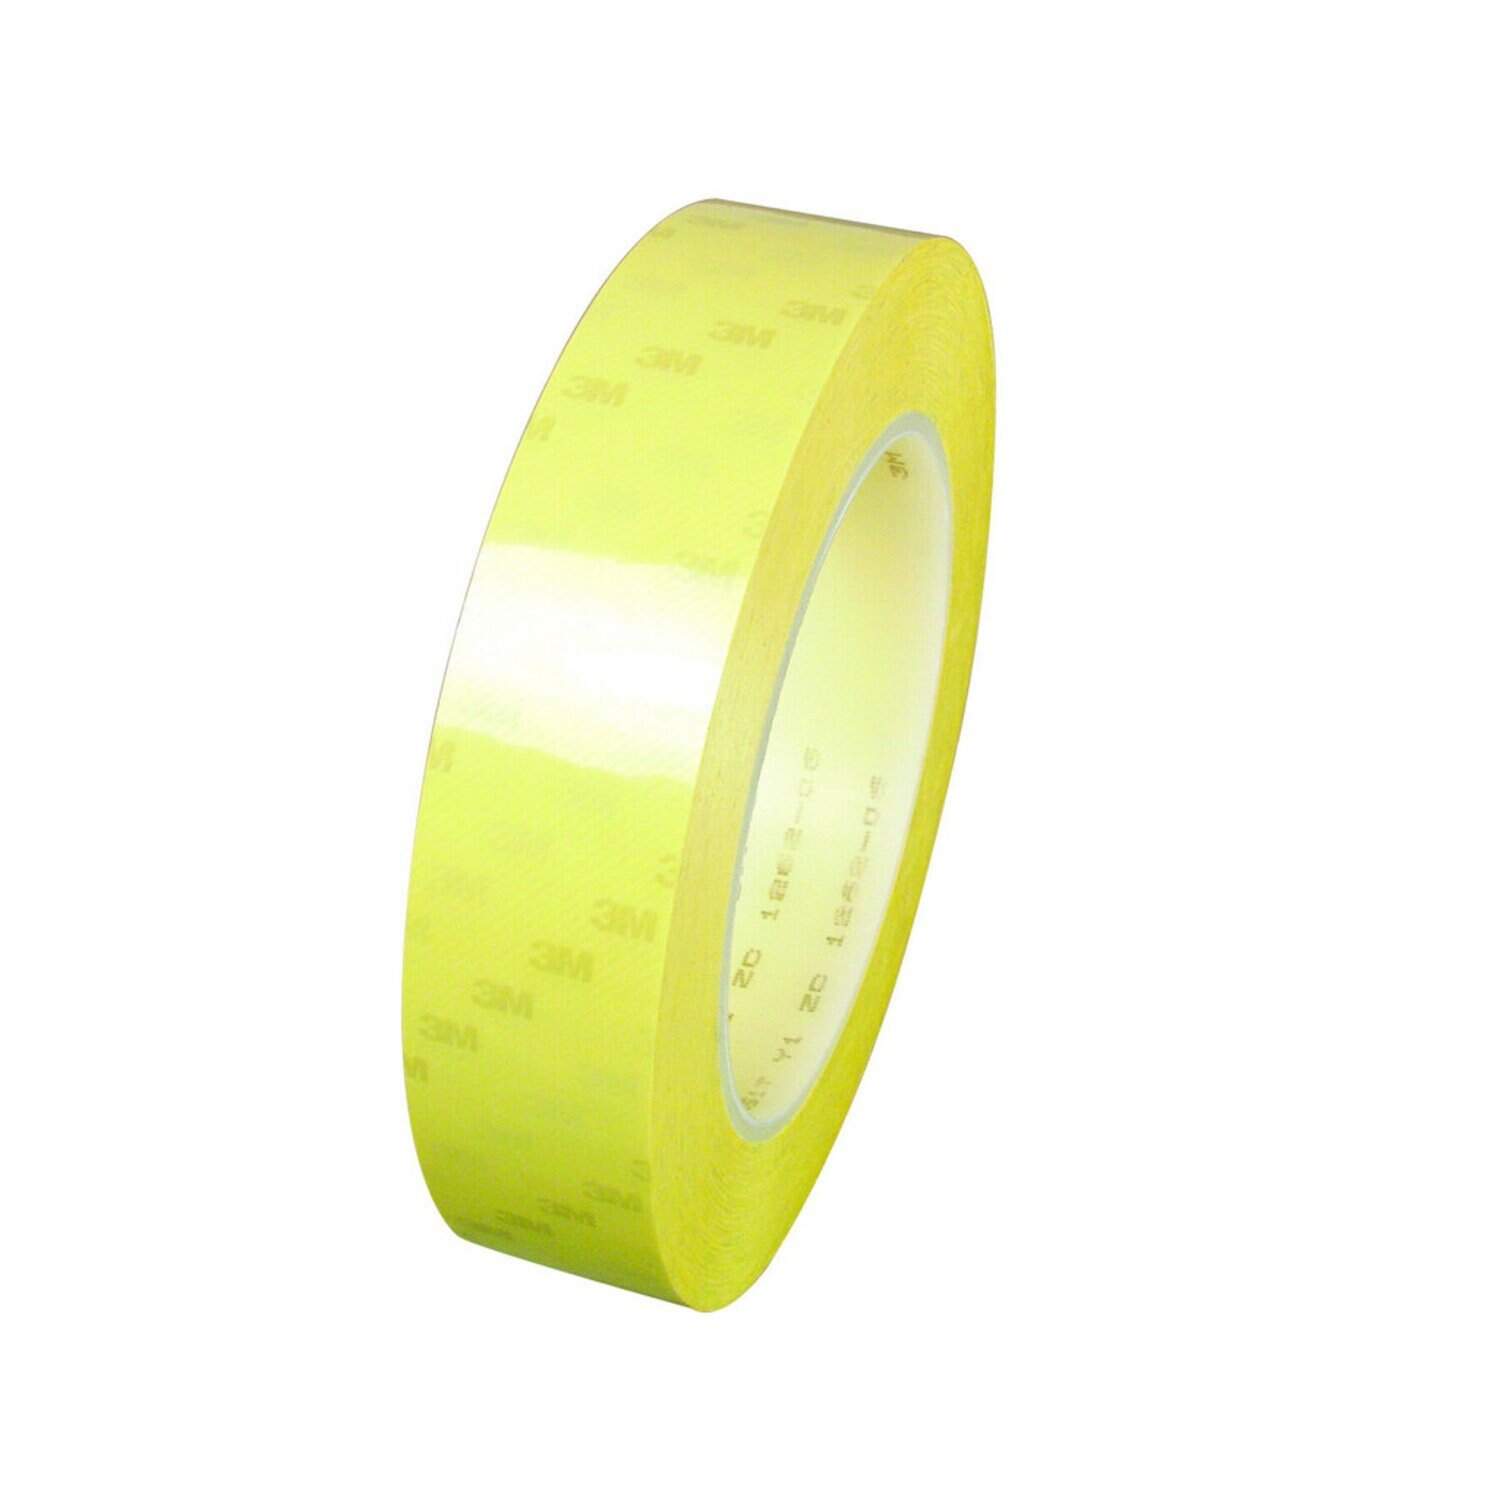 7000133149 - 3M Polyester Film Electrical Tape 56, 1/4 in x 72 yd, Yellow, 144
Rolls/Case